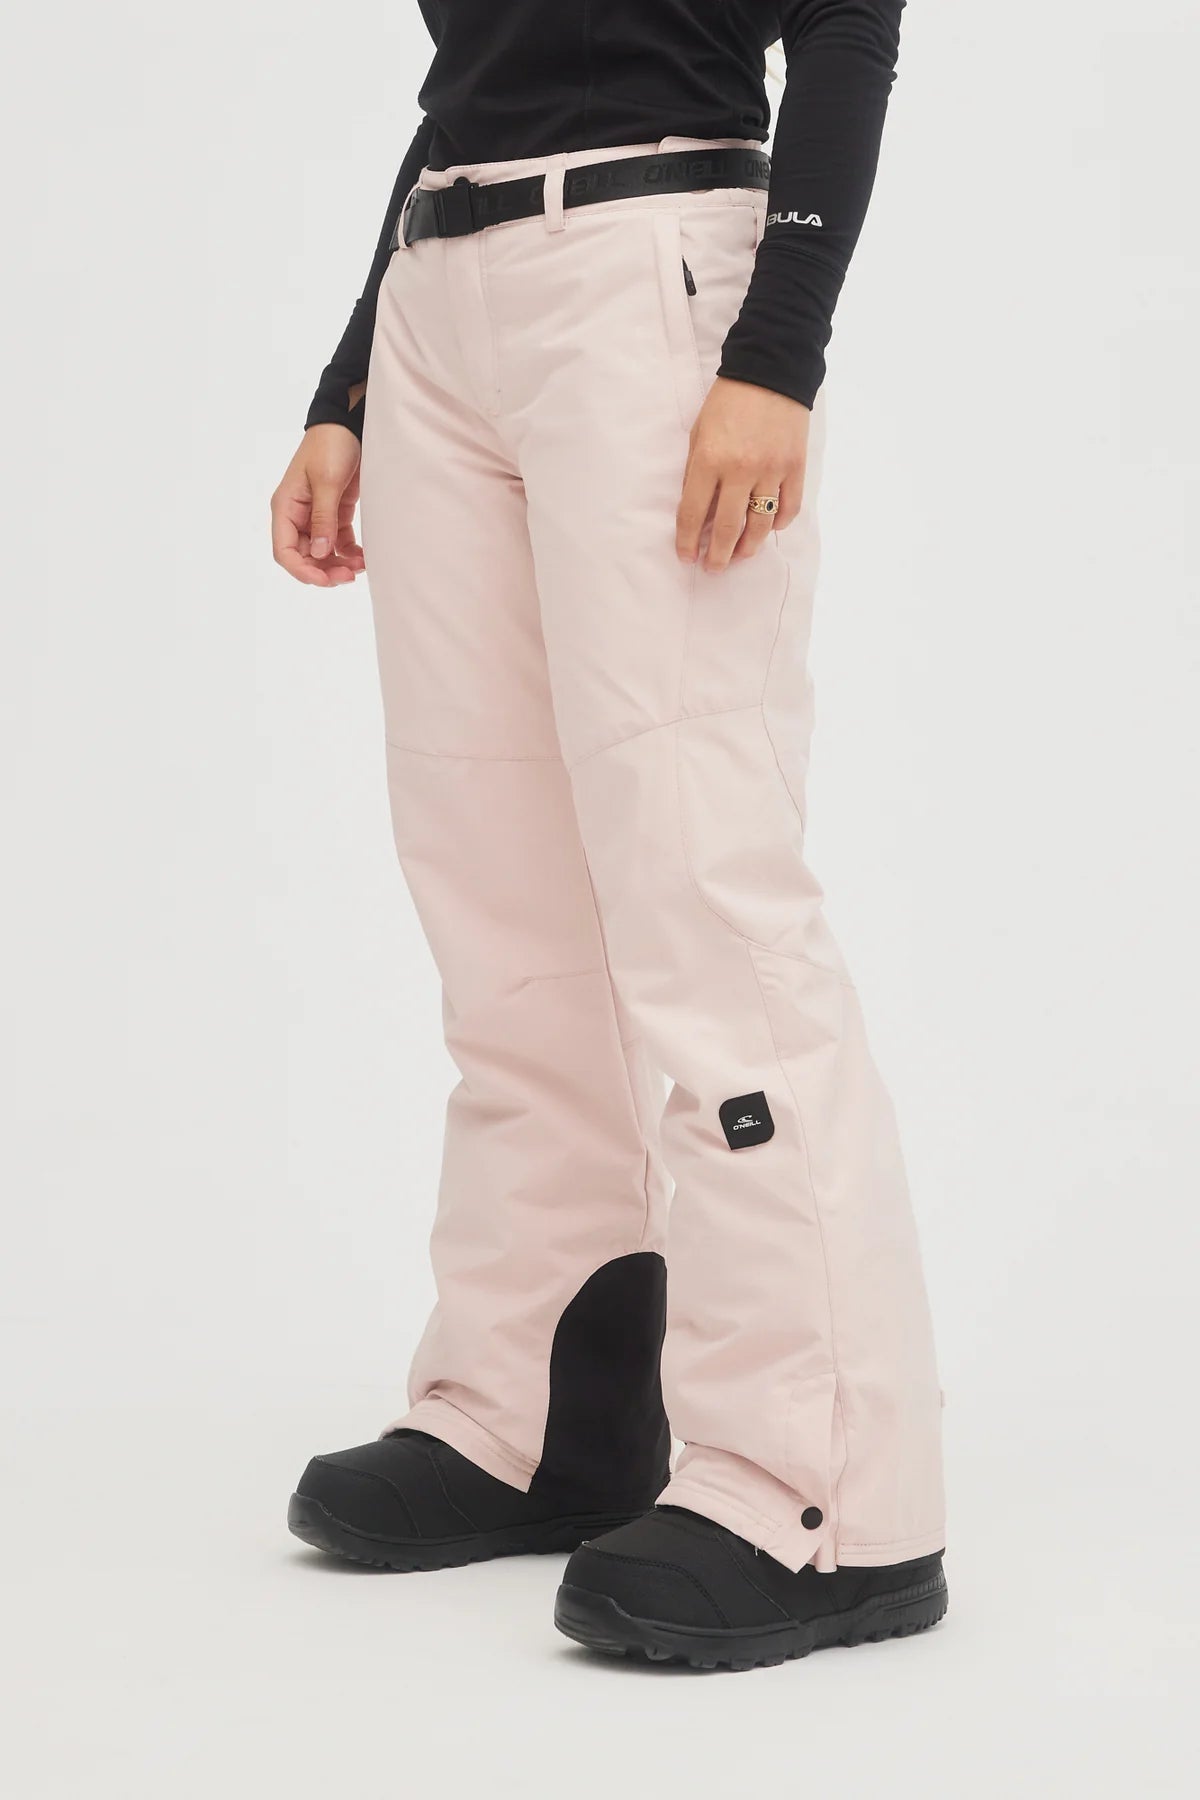 O'Neill Star Insulated Women'S Ski / Snowboard Pants-O'Neill-Sports Replay - Sports Excellence